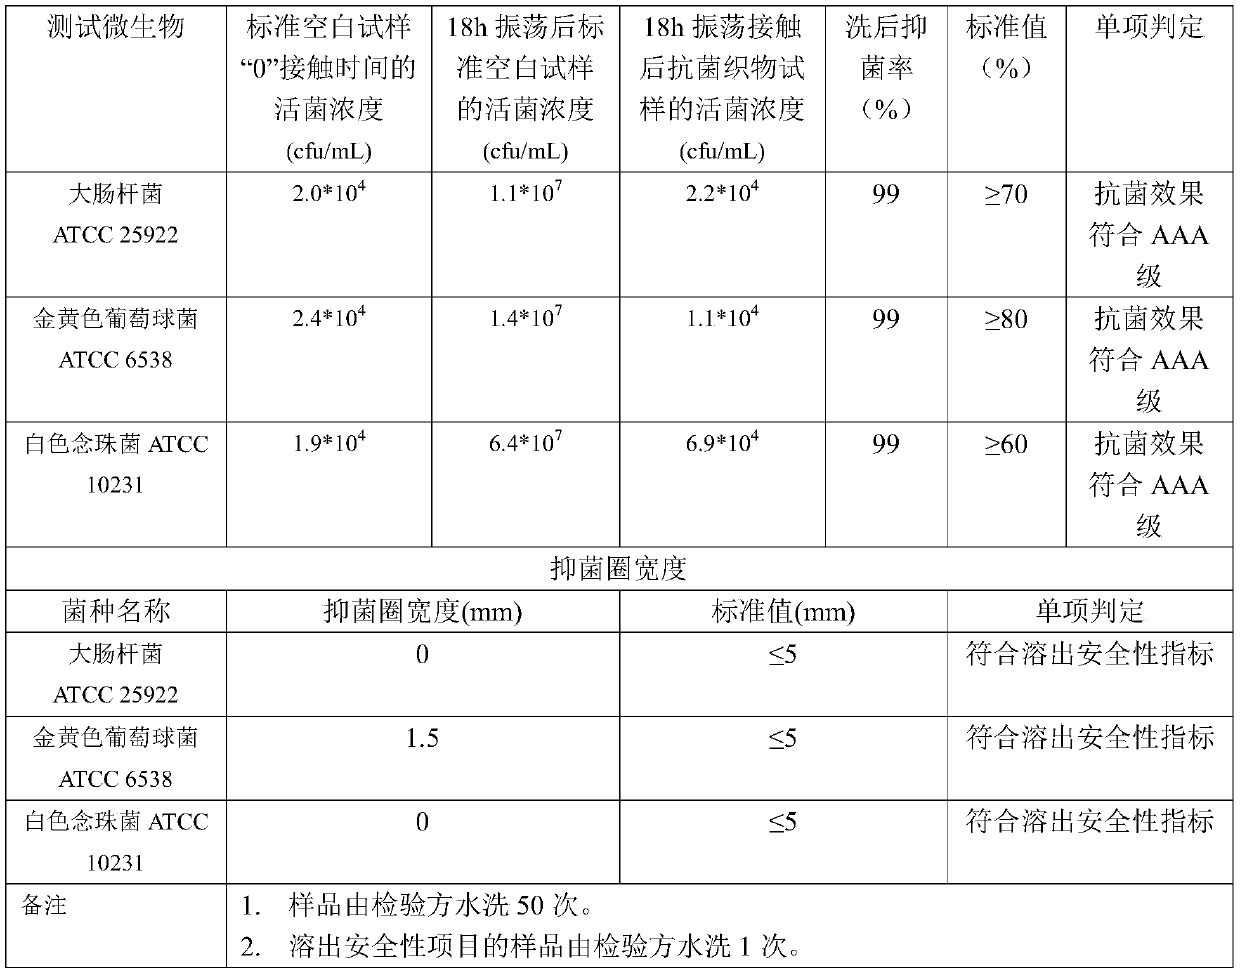 Initiative broad-spectrum lasting antibacterial and antiviral medical protective clothing, textile fabric and preparation method thereof